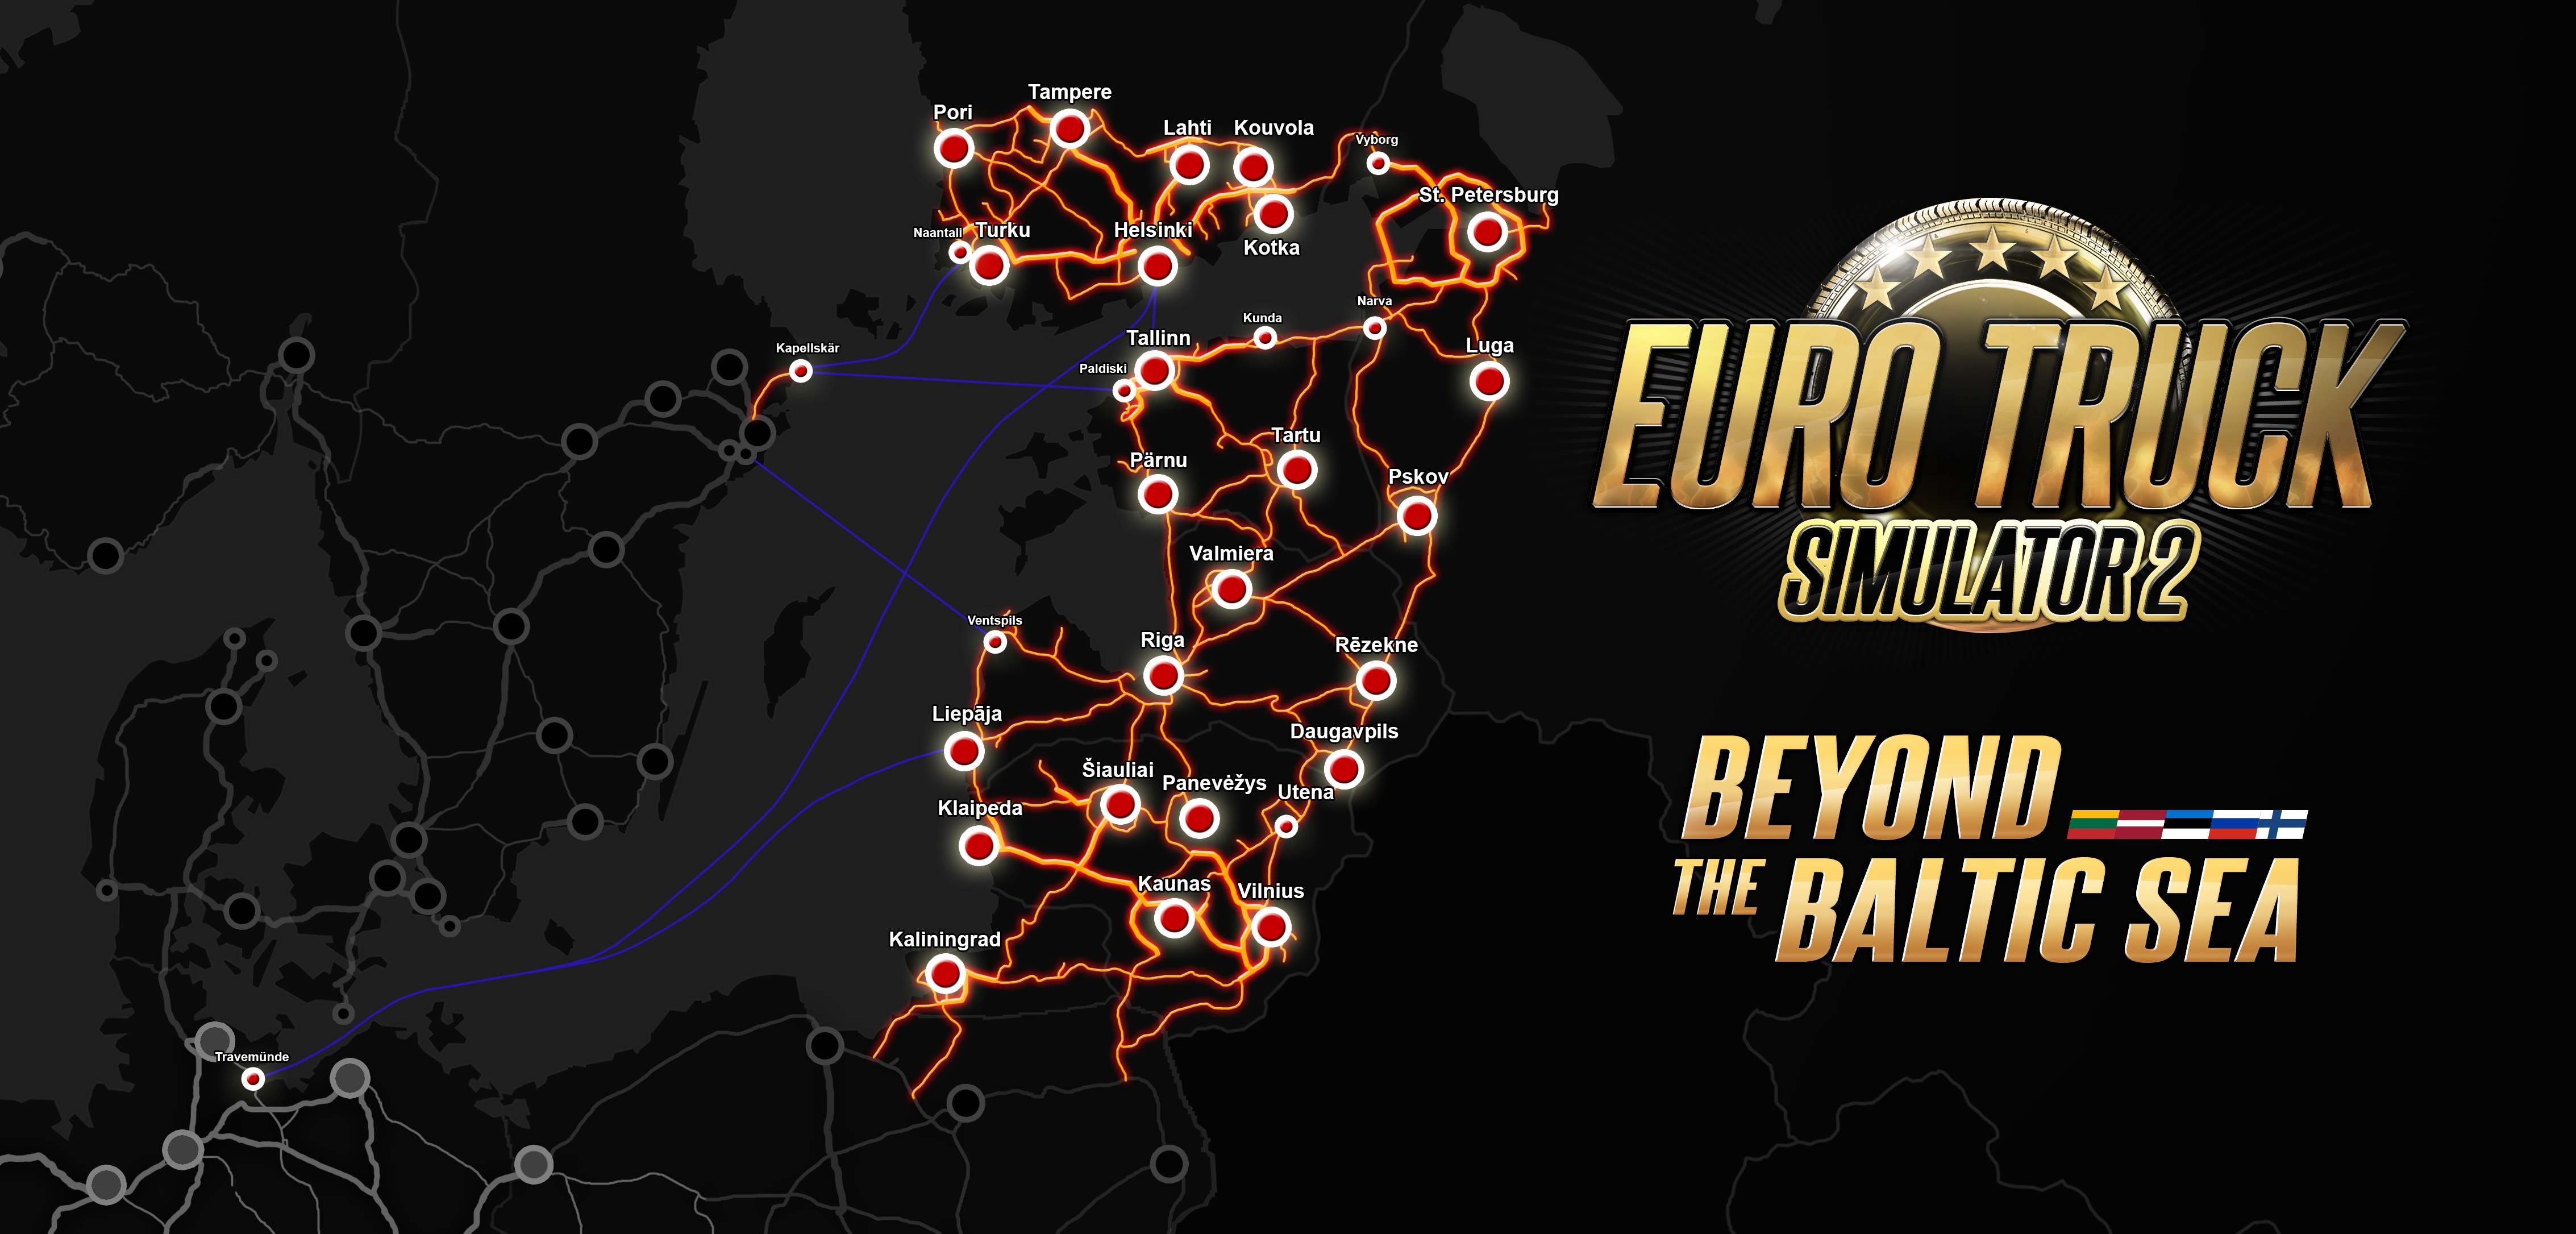 what does euro truck simulator 2 gold edition include?